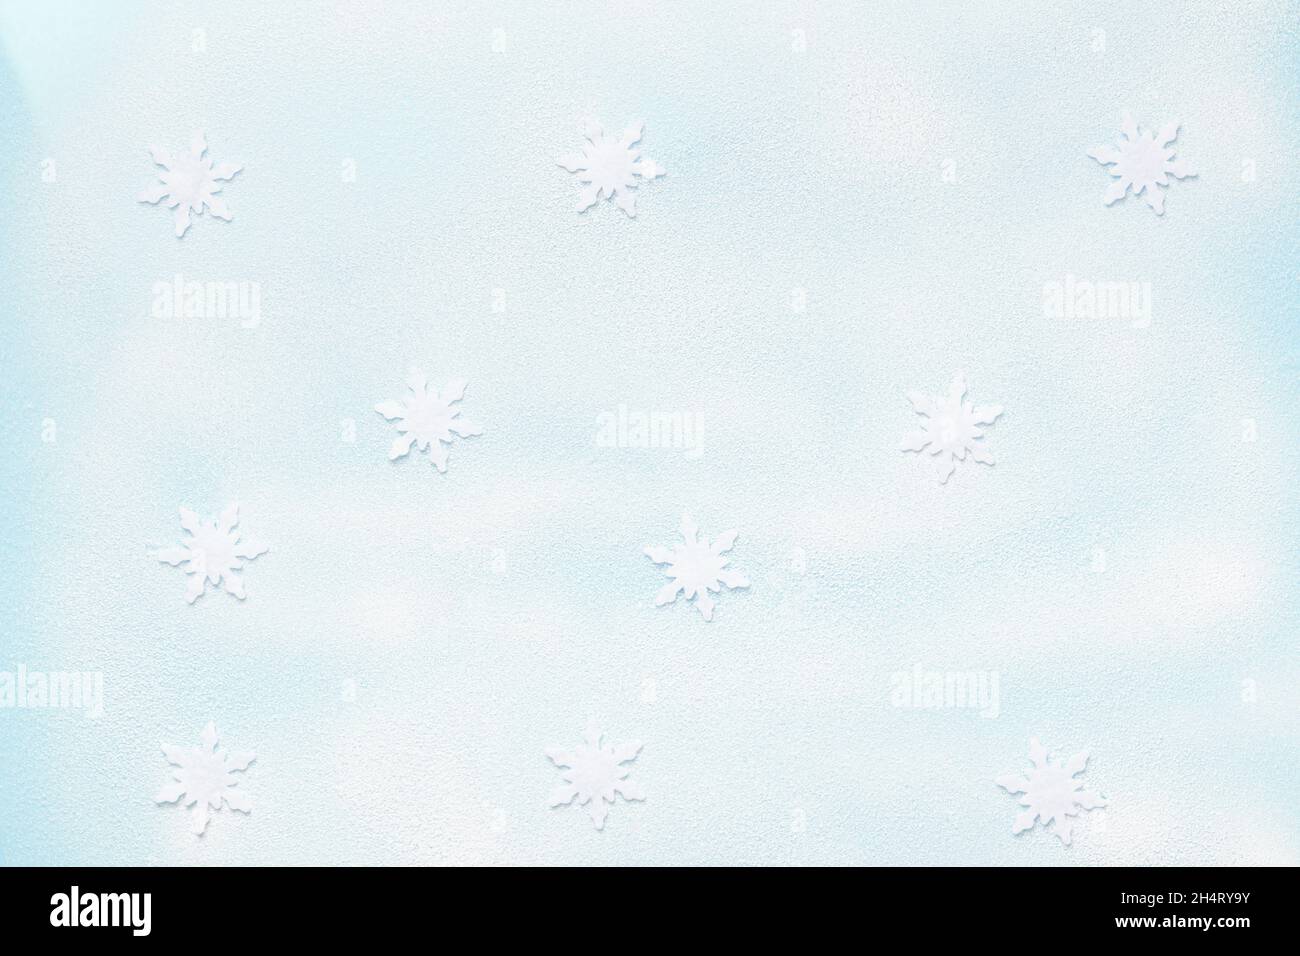 Winter new year snowy background. Composition with snowflake decorations. Stock Photo